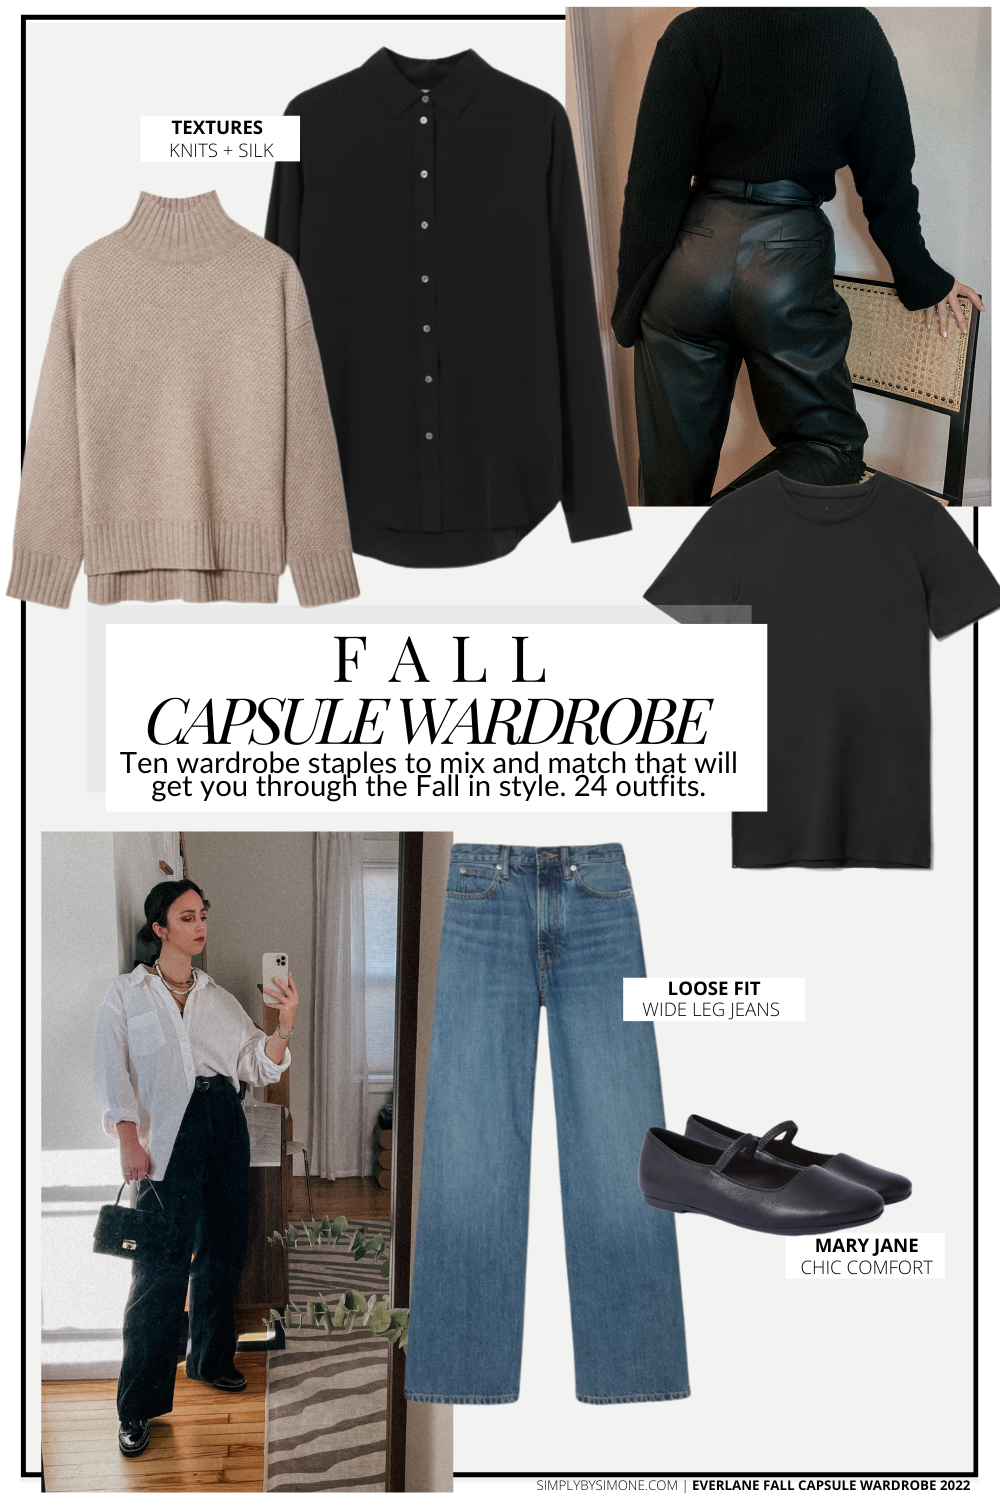 Affordable Everlane Fall Capsule Wardrobe | 10 Pieces, 24 Outfits | How to Build a Capsule Wardrobe | Everlane Fall Clothes | Outfit Inspiration | 24 Fall Weather Outfit Ideas | Fall Vacation Packing Guide | Everlane Fall Capsule Wardrobe | 10 Items to Wear This Fall | Simply by Simone